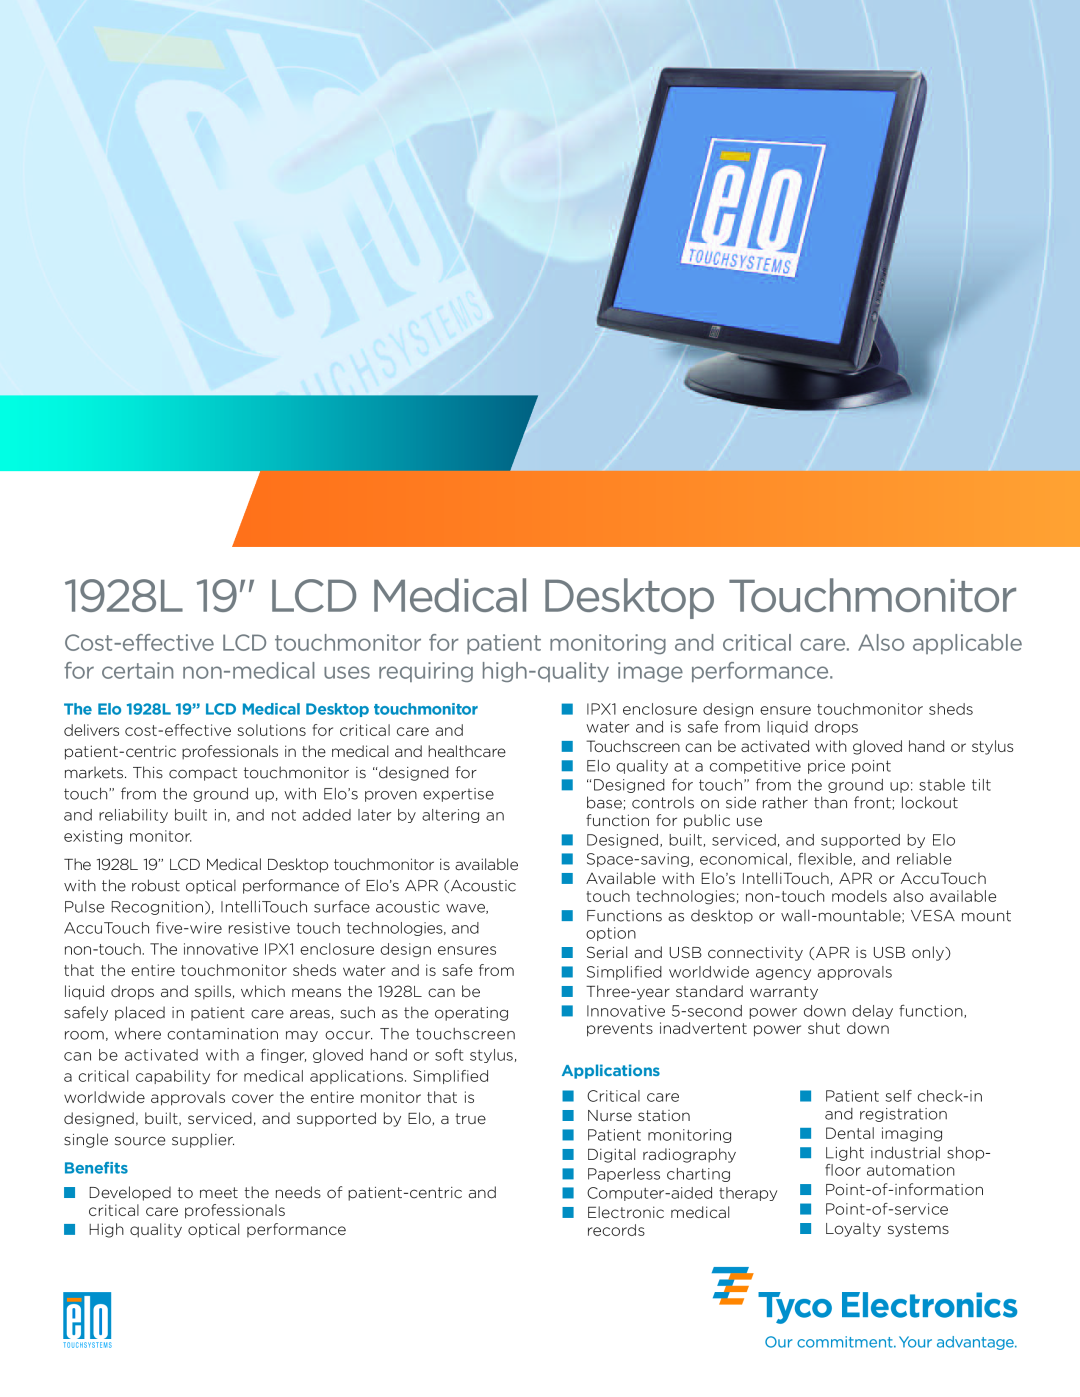 Elo TouchSystems warranty The Elo 1928L 19” LCD Medical Desktoptouchmonitor, Benefits, Applications 